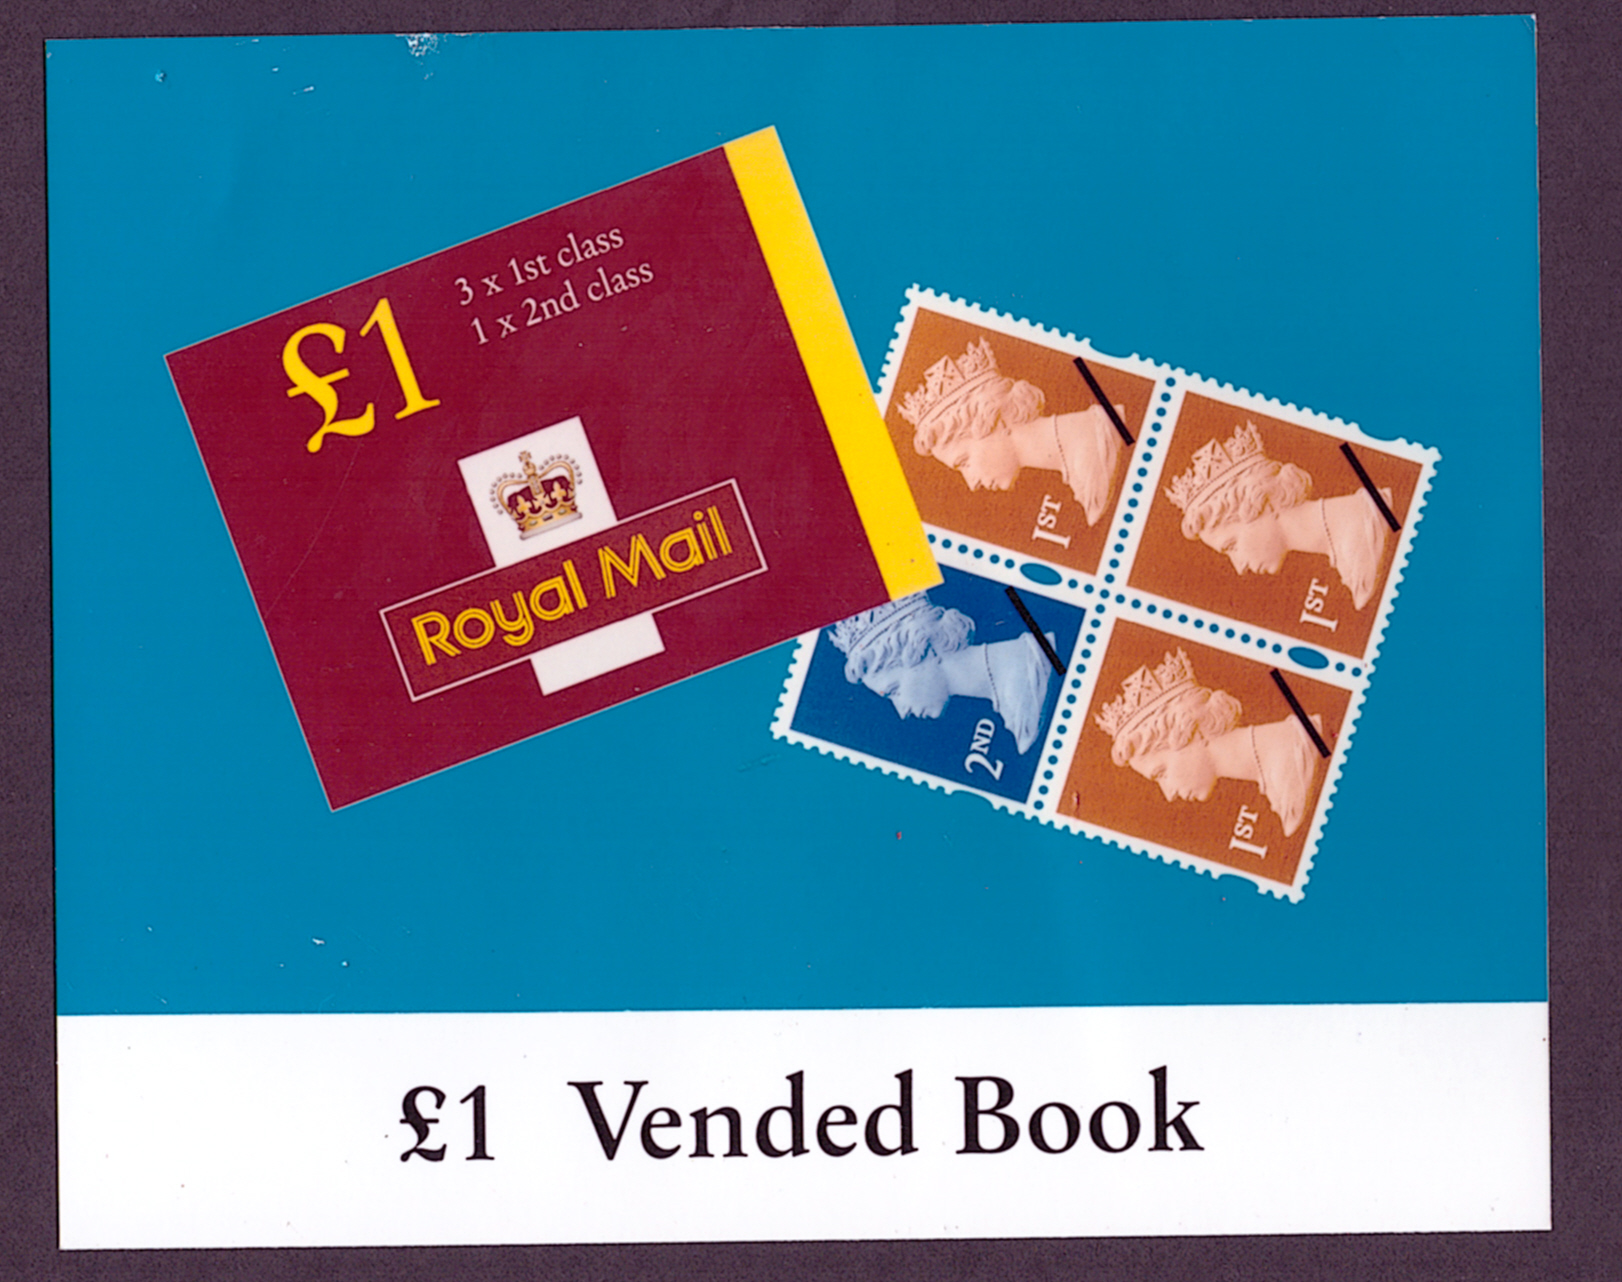 (image for) Circa 2000 Royal Mail £1 Vended Book glossy promotional photograph.